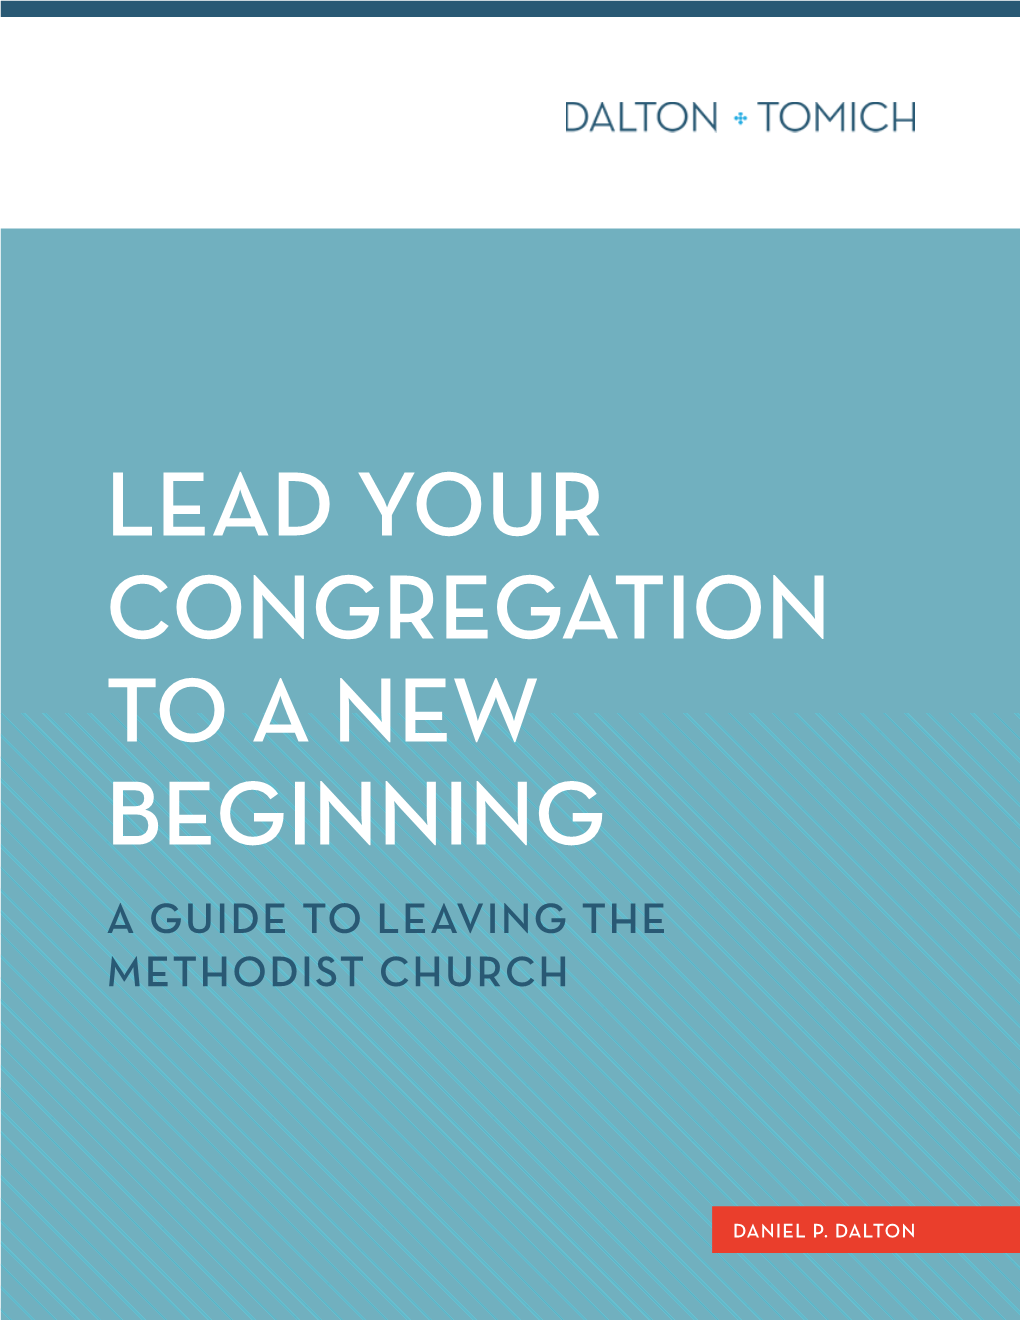 Lead Your Congregation to a New Beginning a Guide to Leaving the Methodist Church